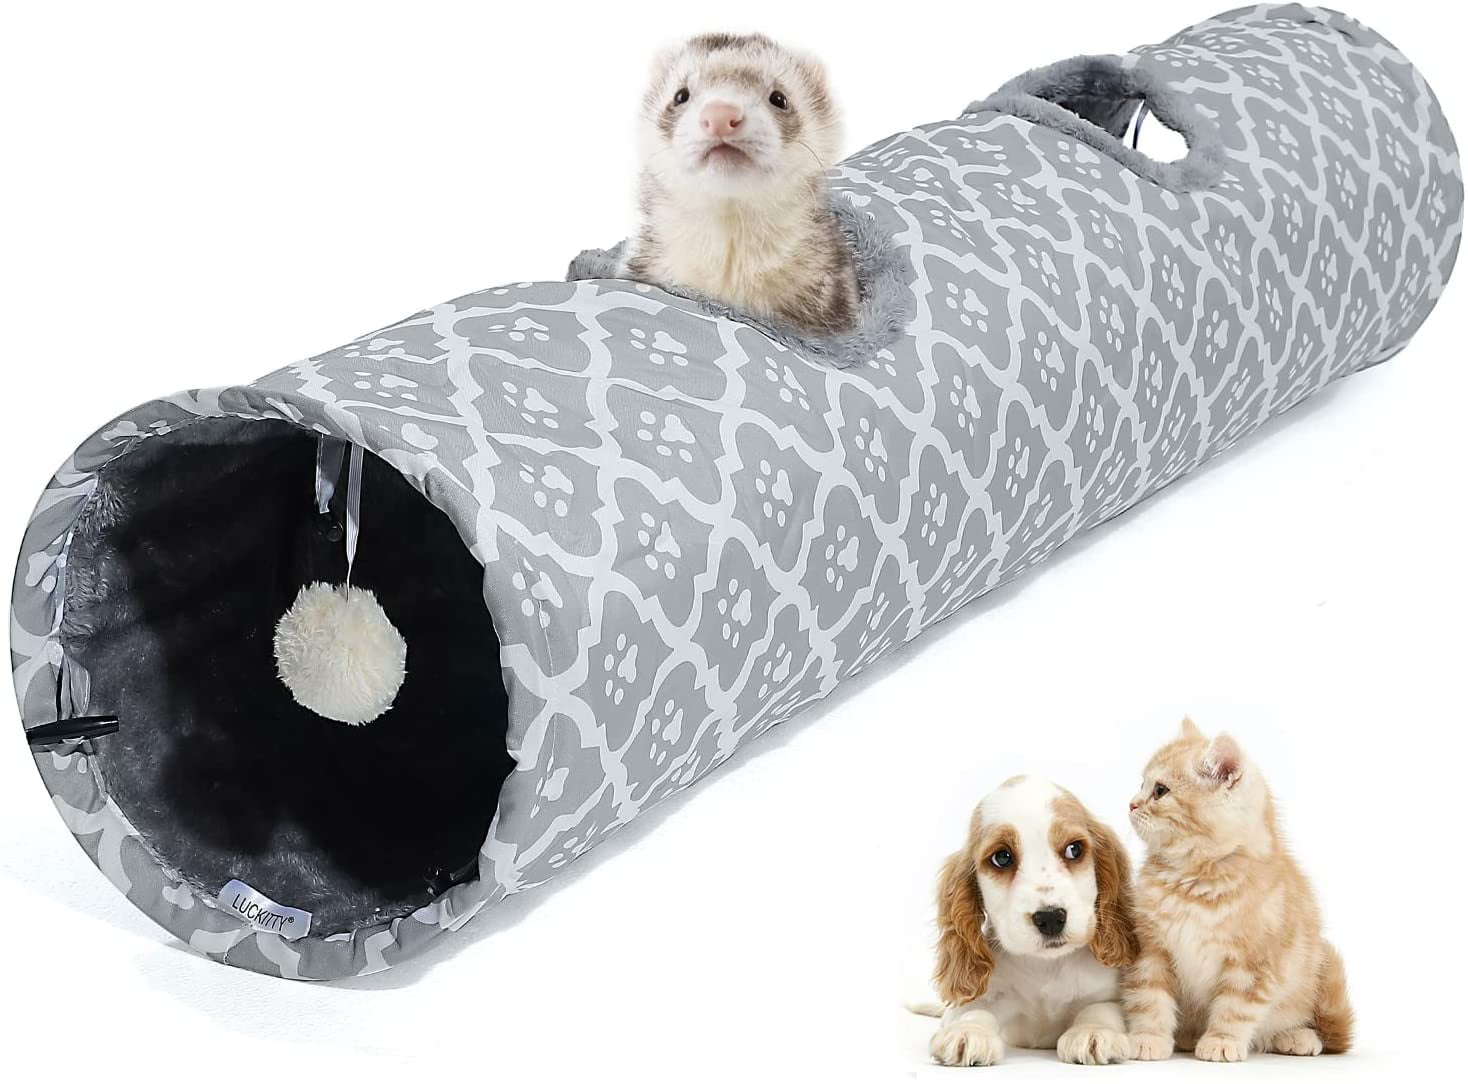 Kittens LUCKITTY Geometric Cat Tunnel with Plush Inside,Cats Toys Collapsible Tunnel Tube with Balls Ferrets,Puppy and Dogs for Rabbits 